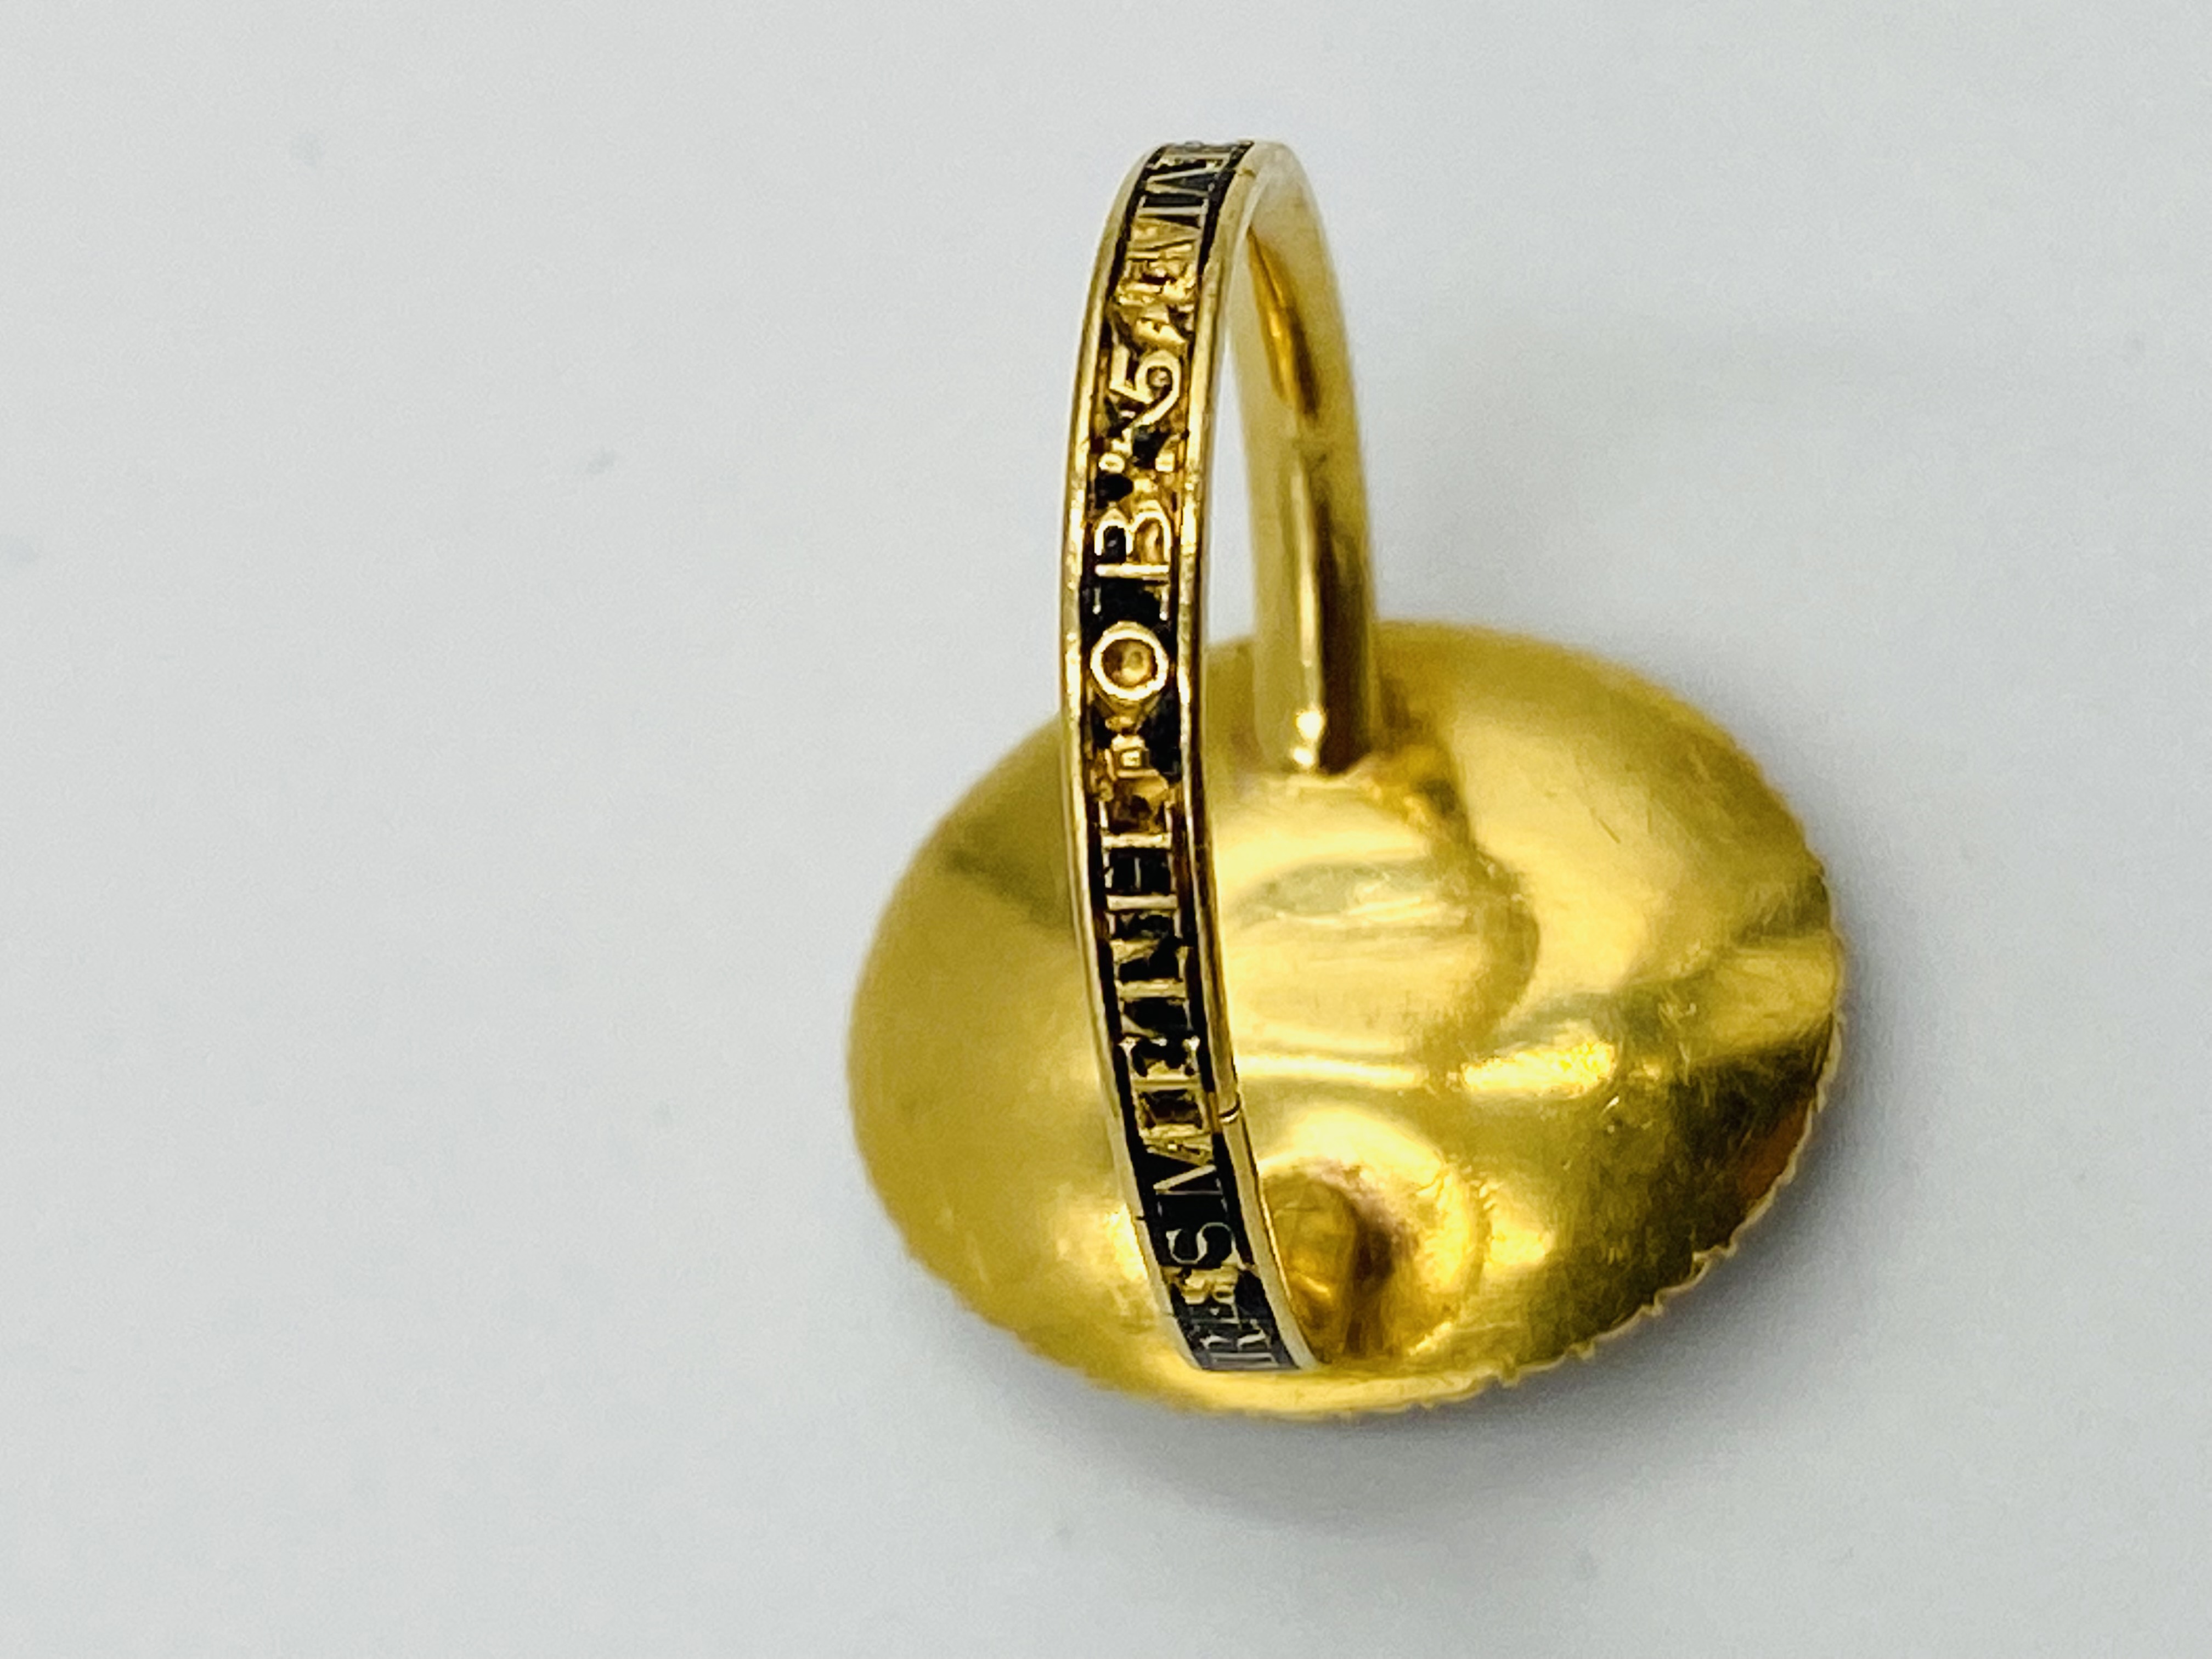 Gold mourning ring dated 1852 - Image 5 of 5